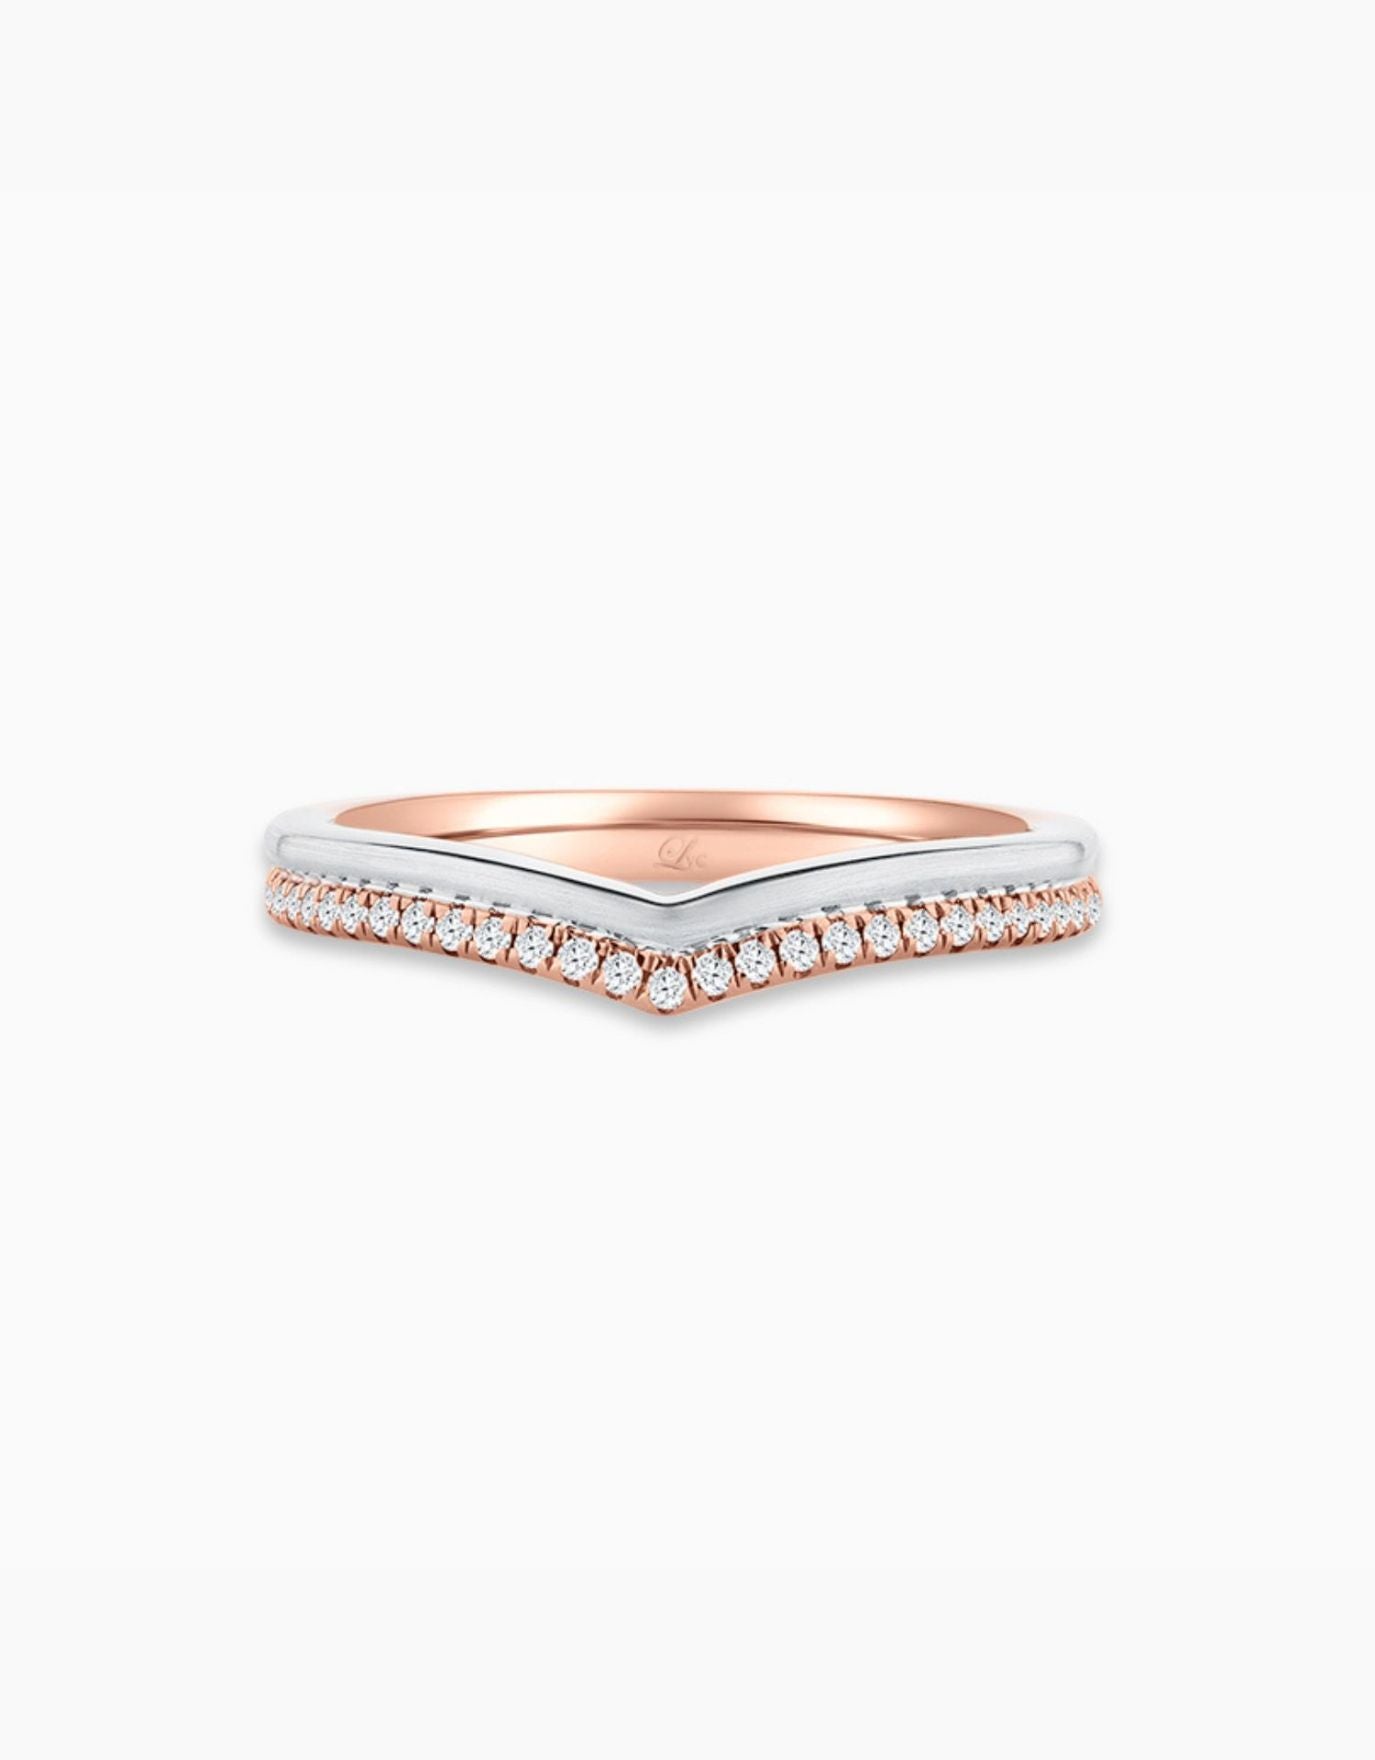 LVC Perfection Amour Wedding Band in Duo Tones with Diamonds